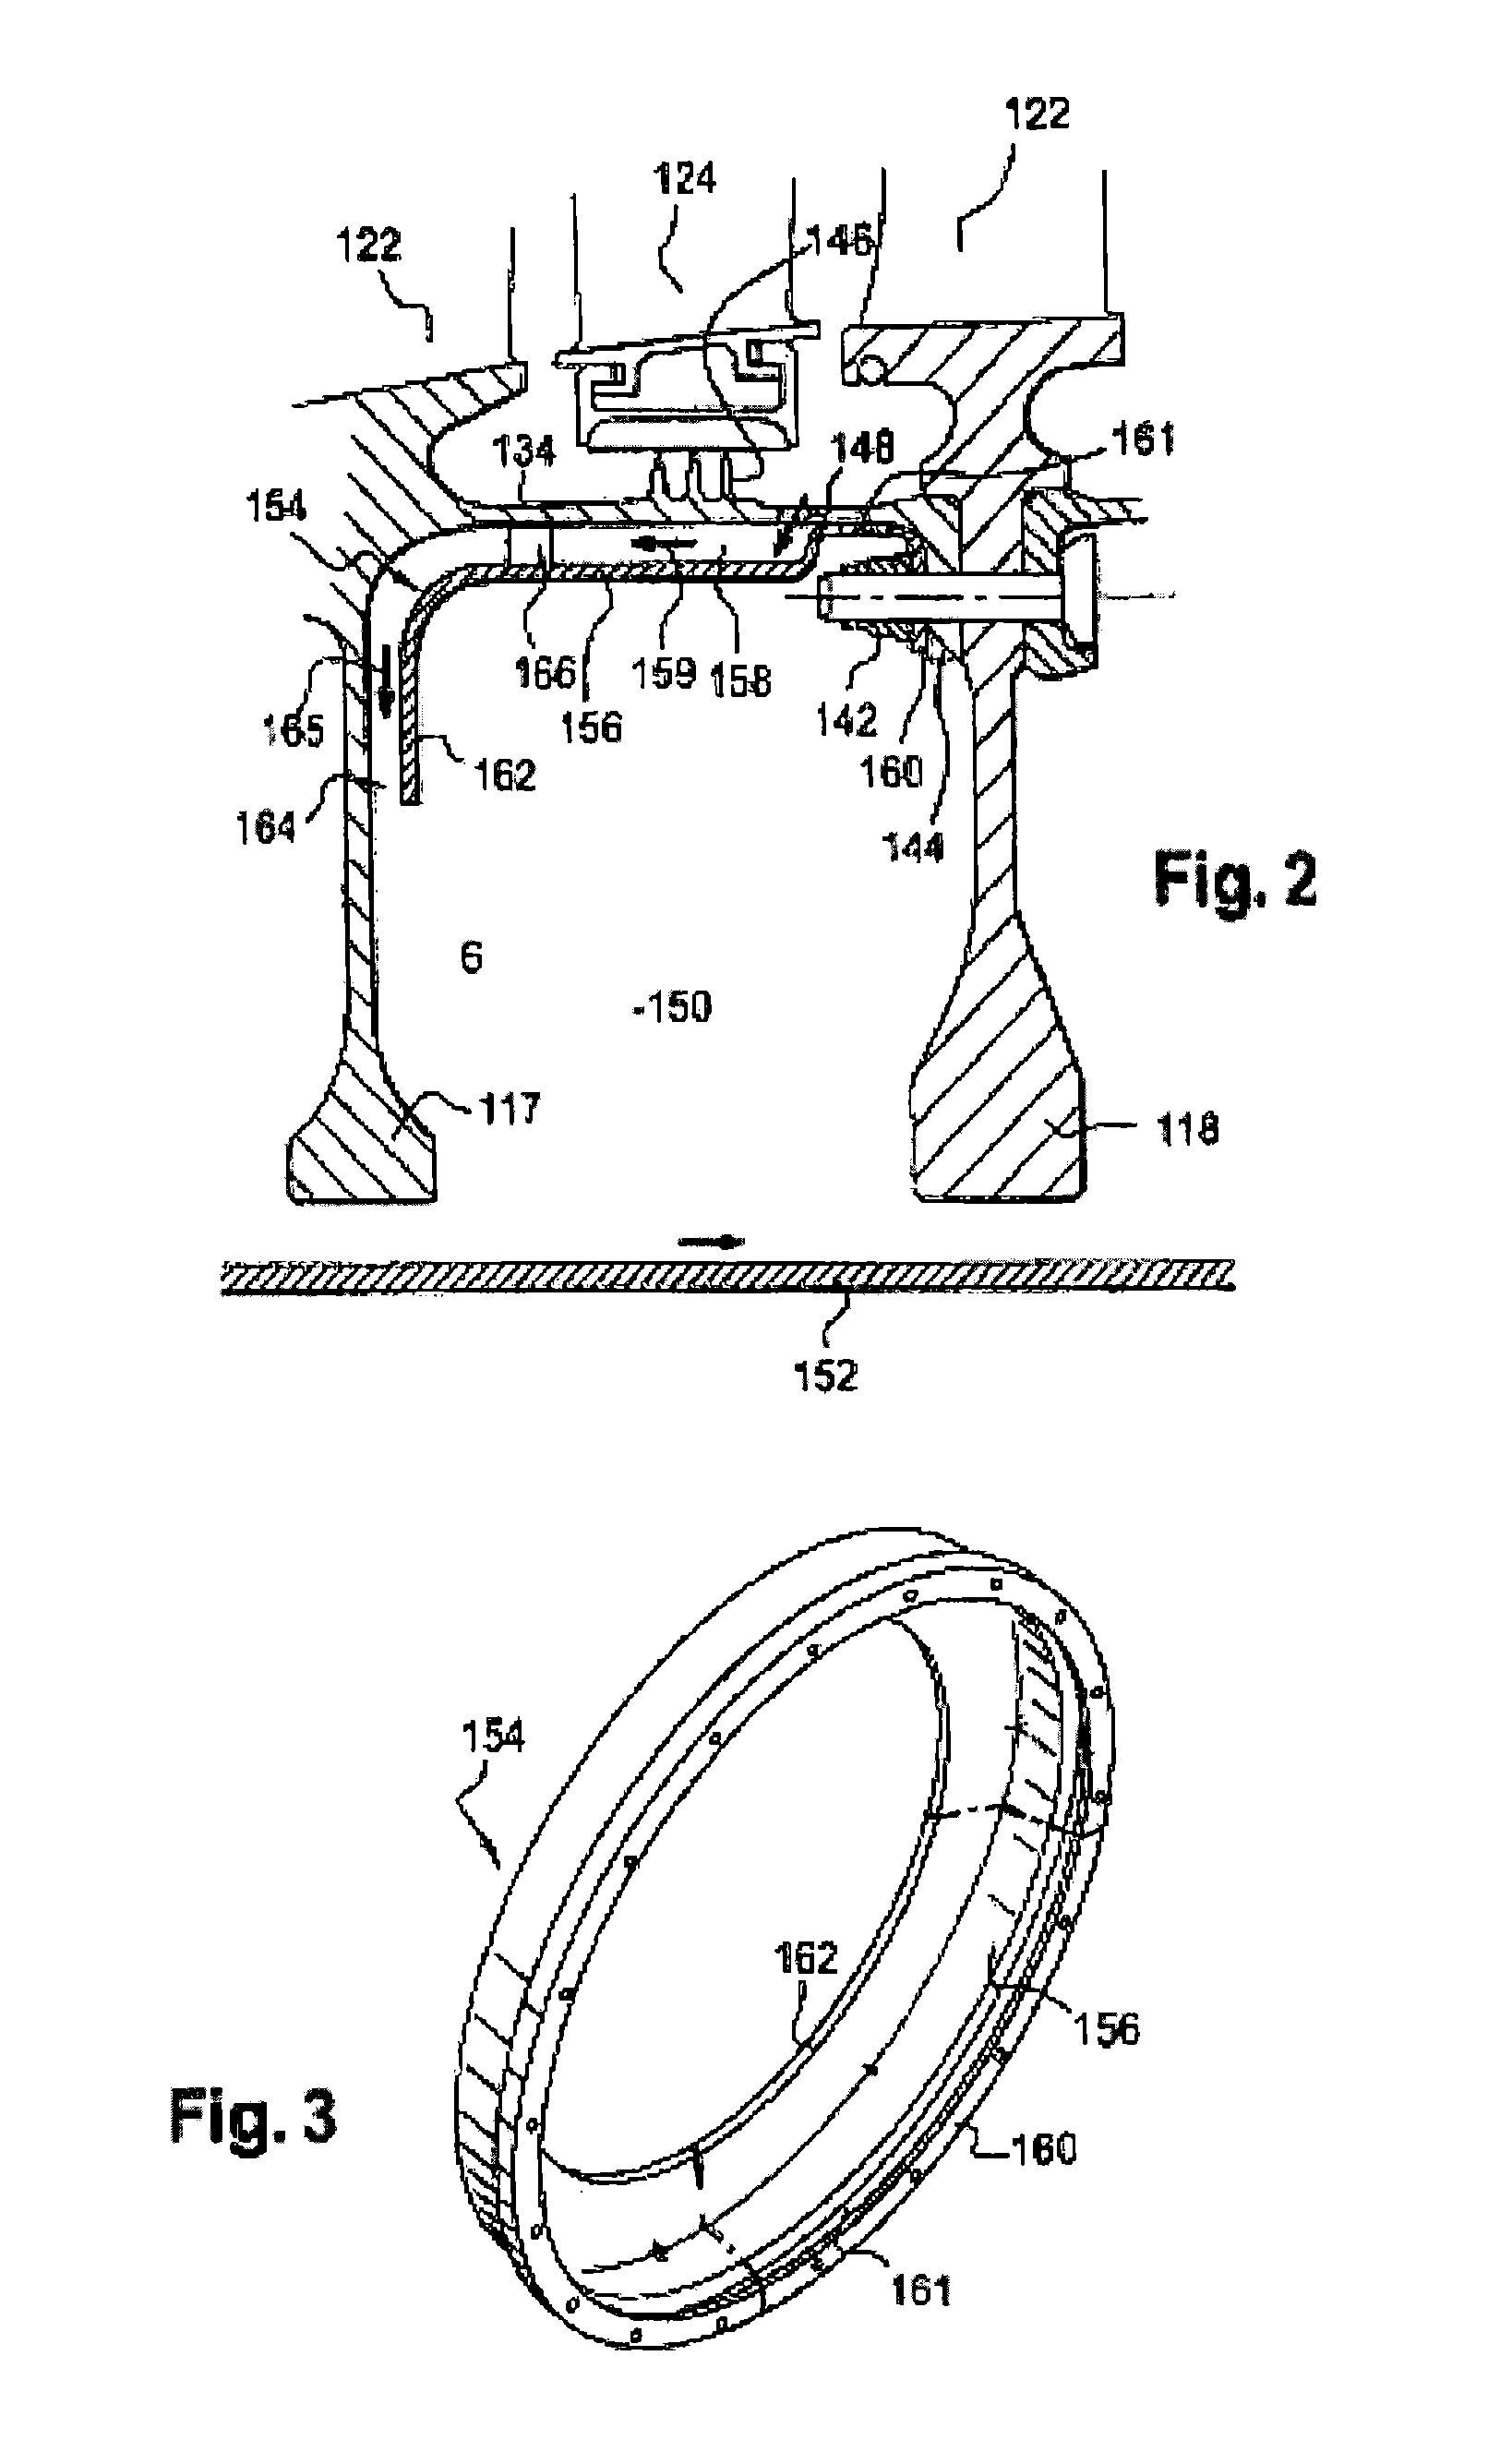 Centripetal air bleed from a turbomachine compressor rotor